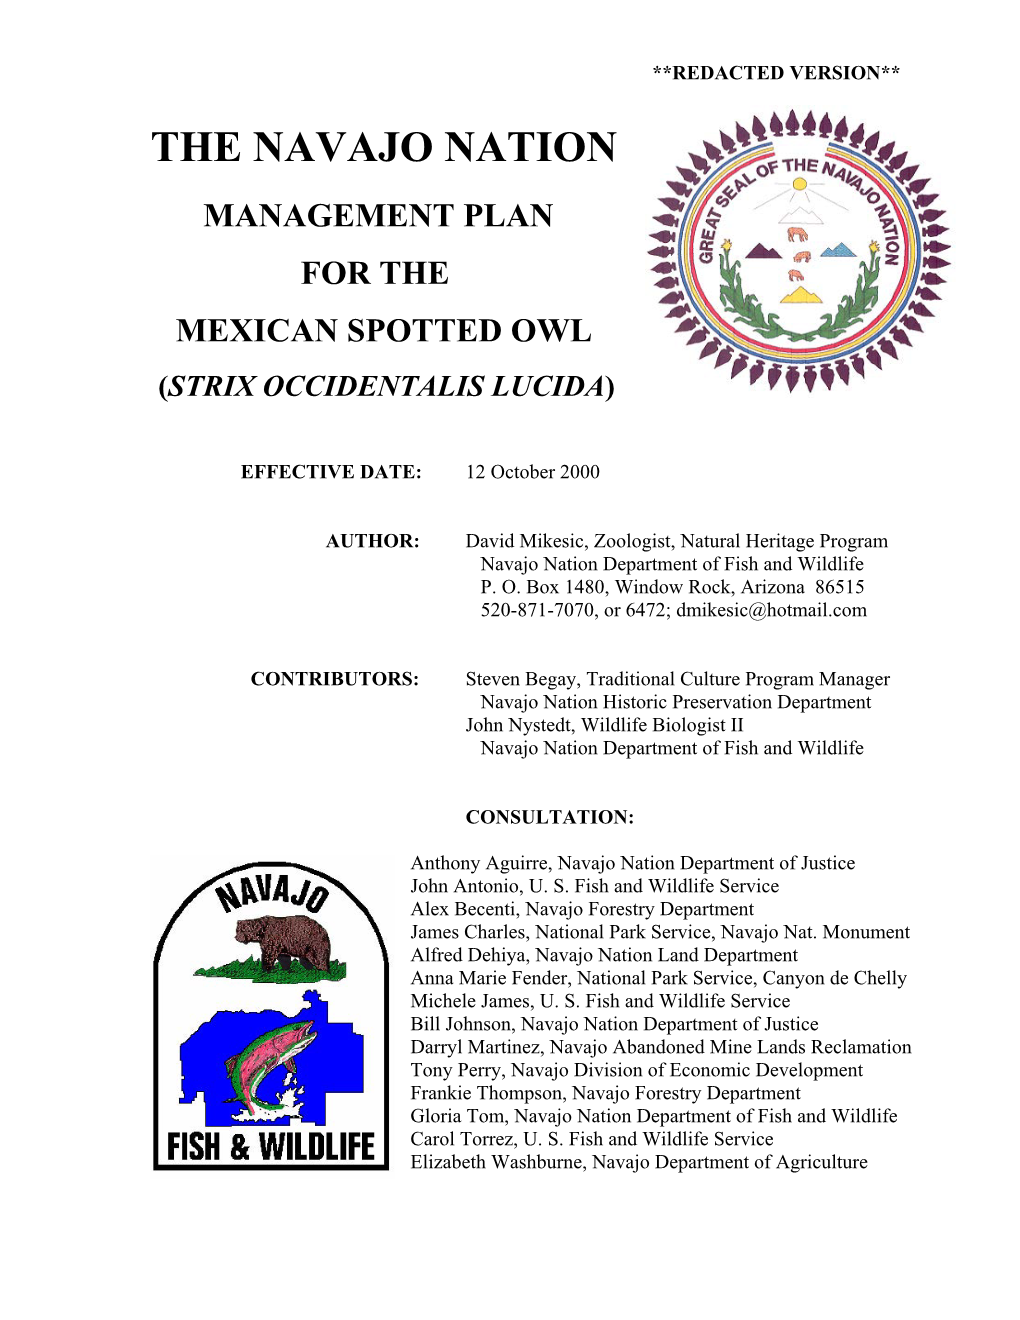 The Navajo Nation Management Plan for the Mexican Spotted